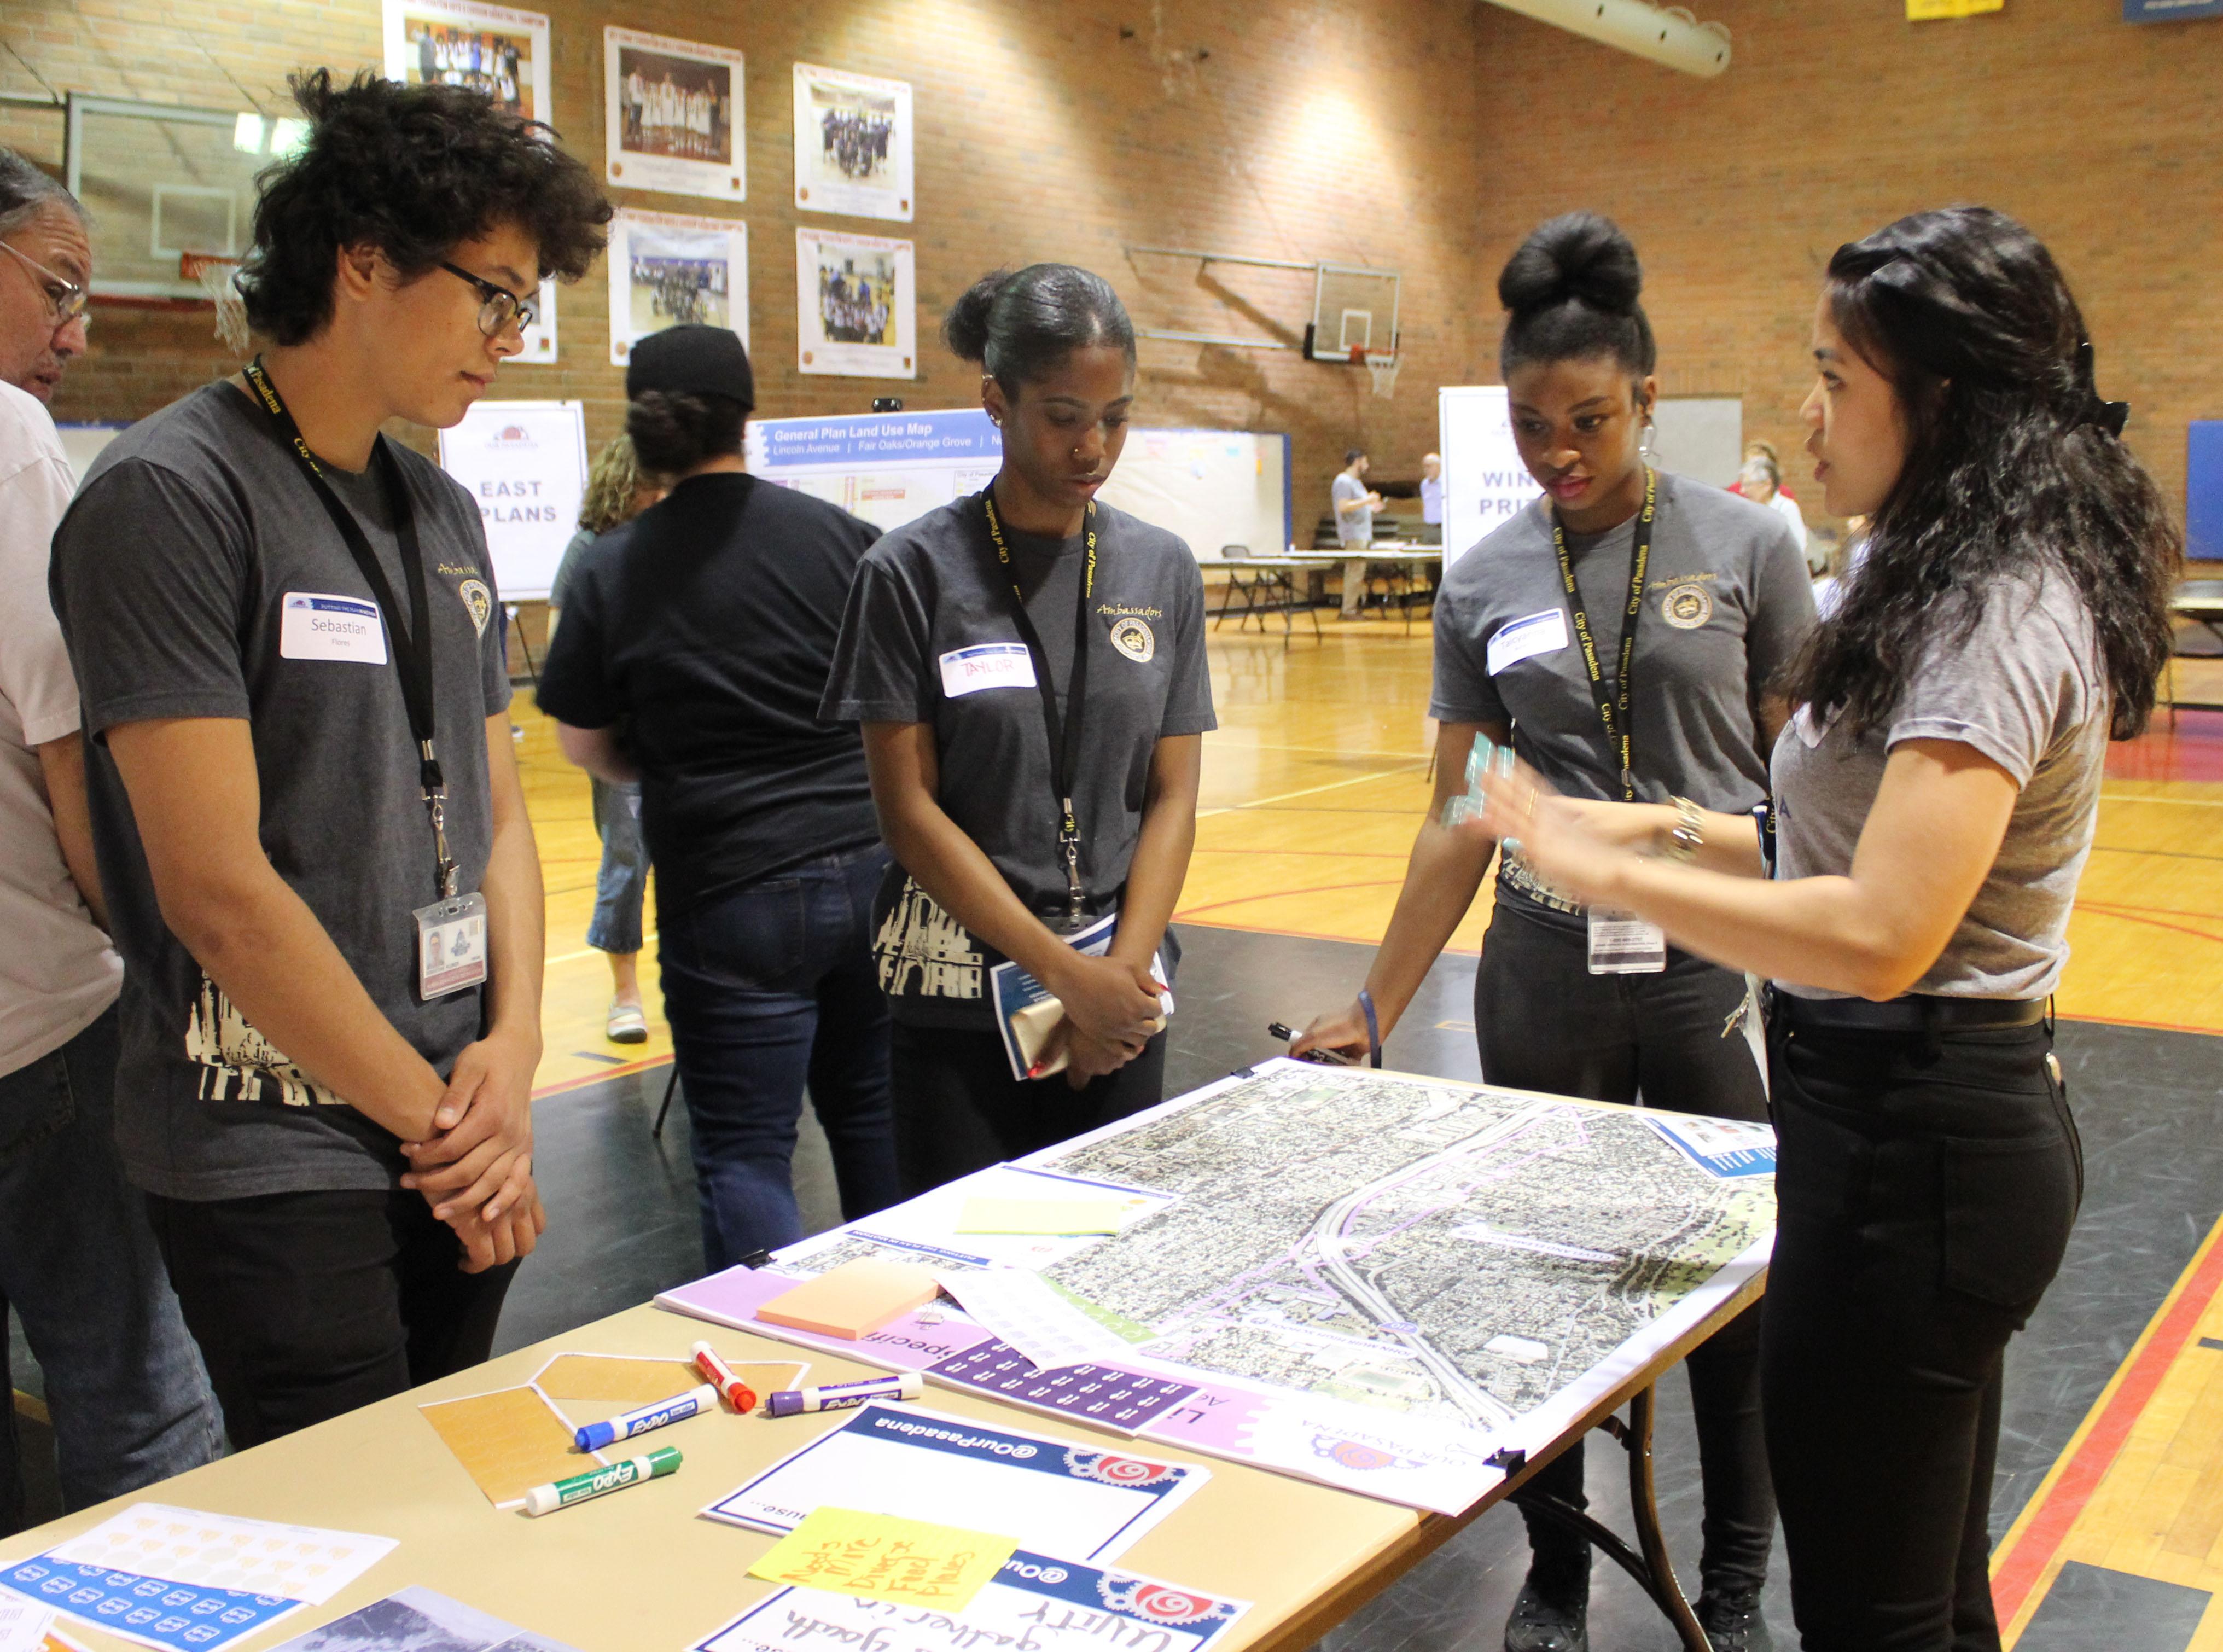 Youth Ambassadors learning about the Our Pasadena program at one of the City's open house